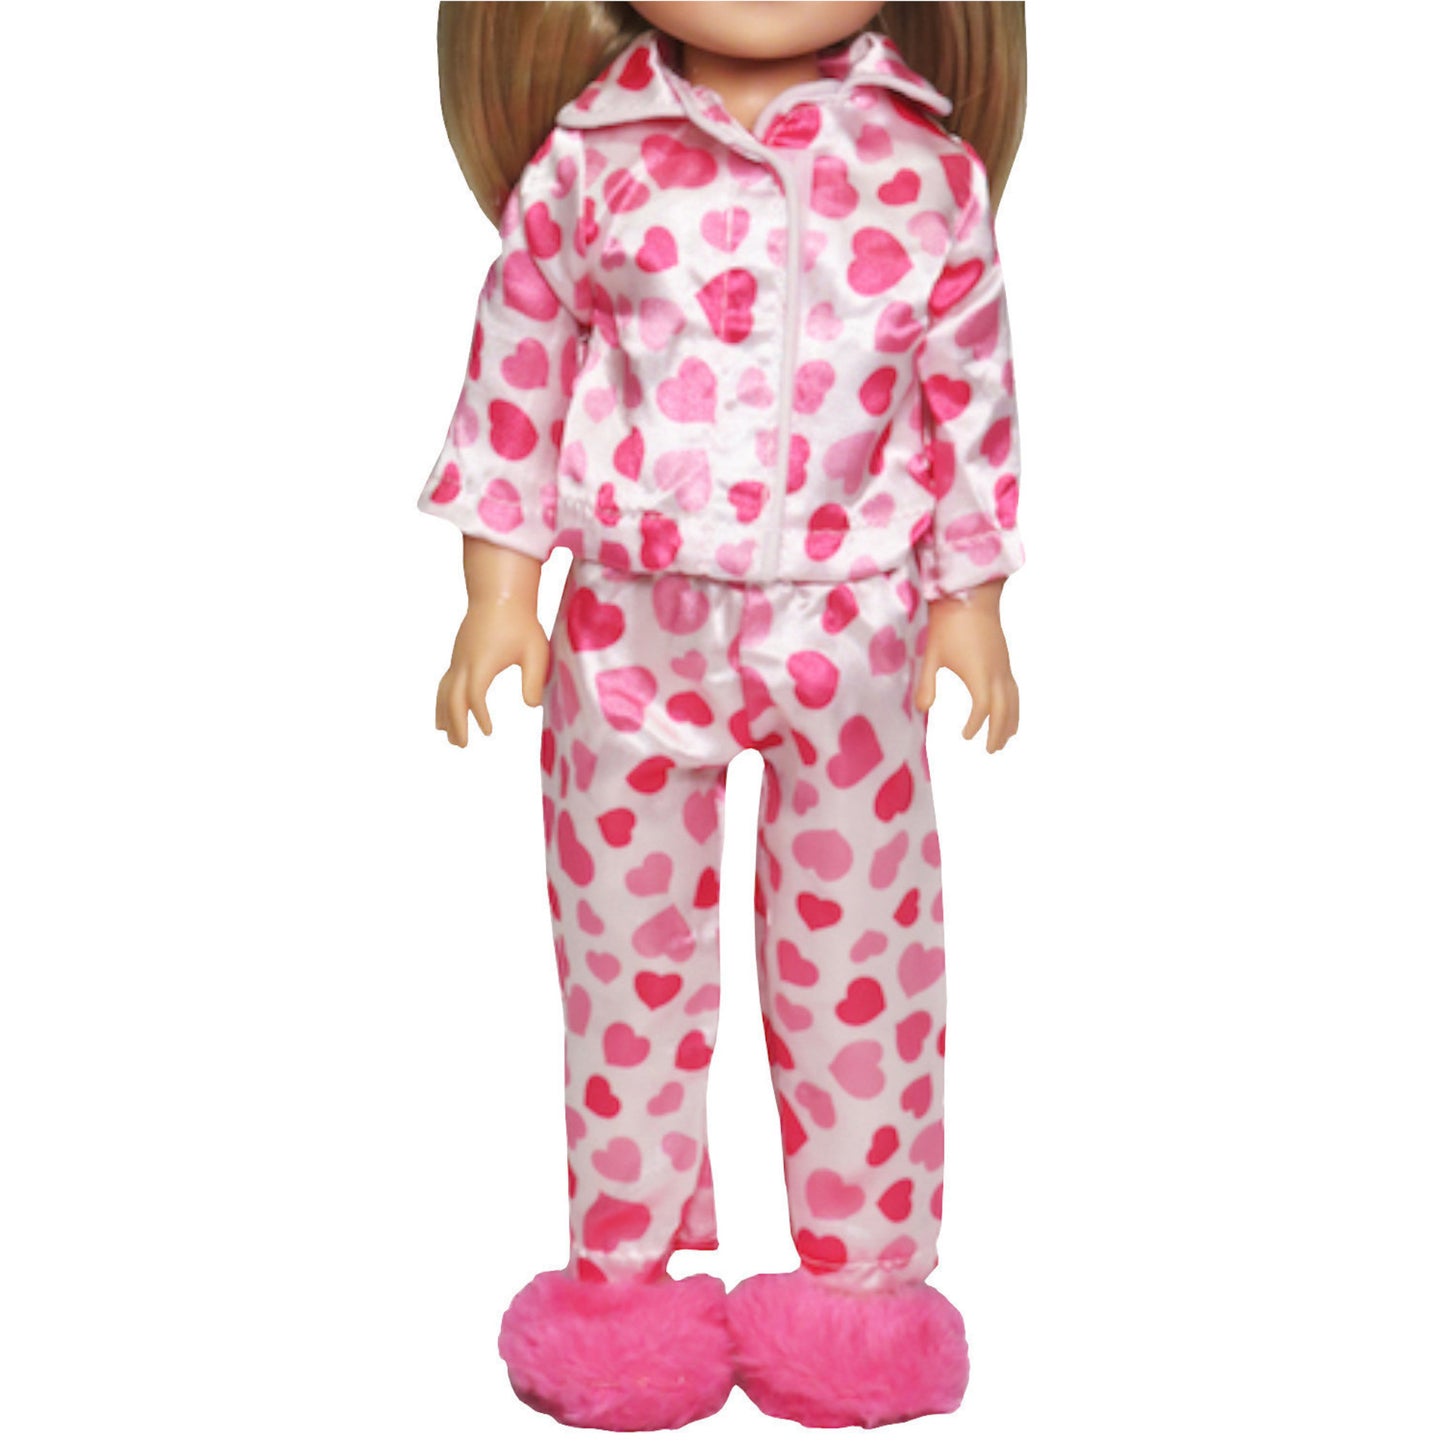 Pink Heart Pajamas for 14 1/2-inch dolls with doll Front